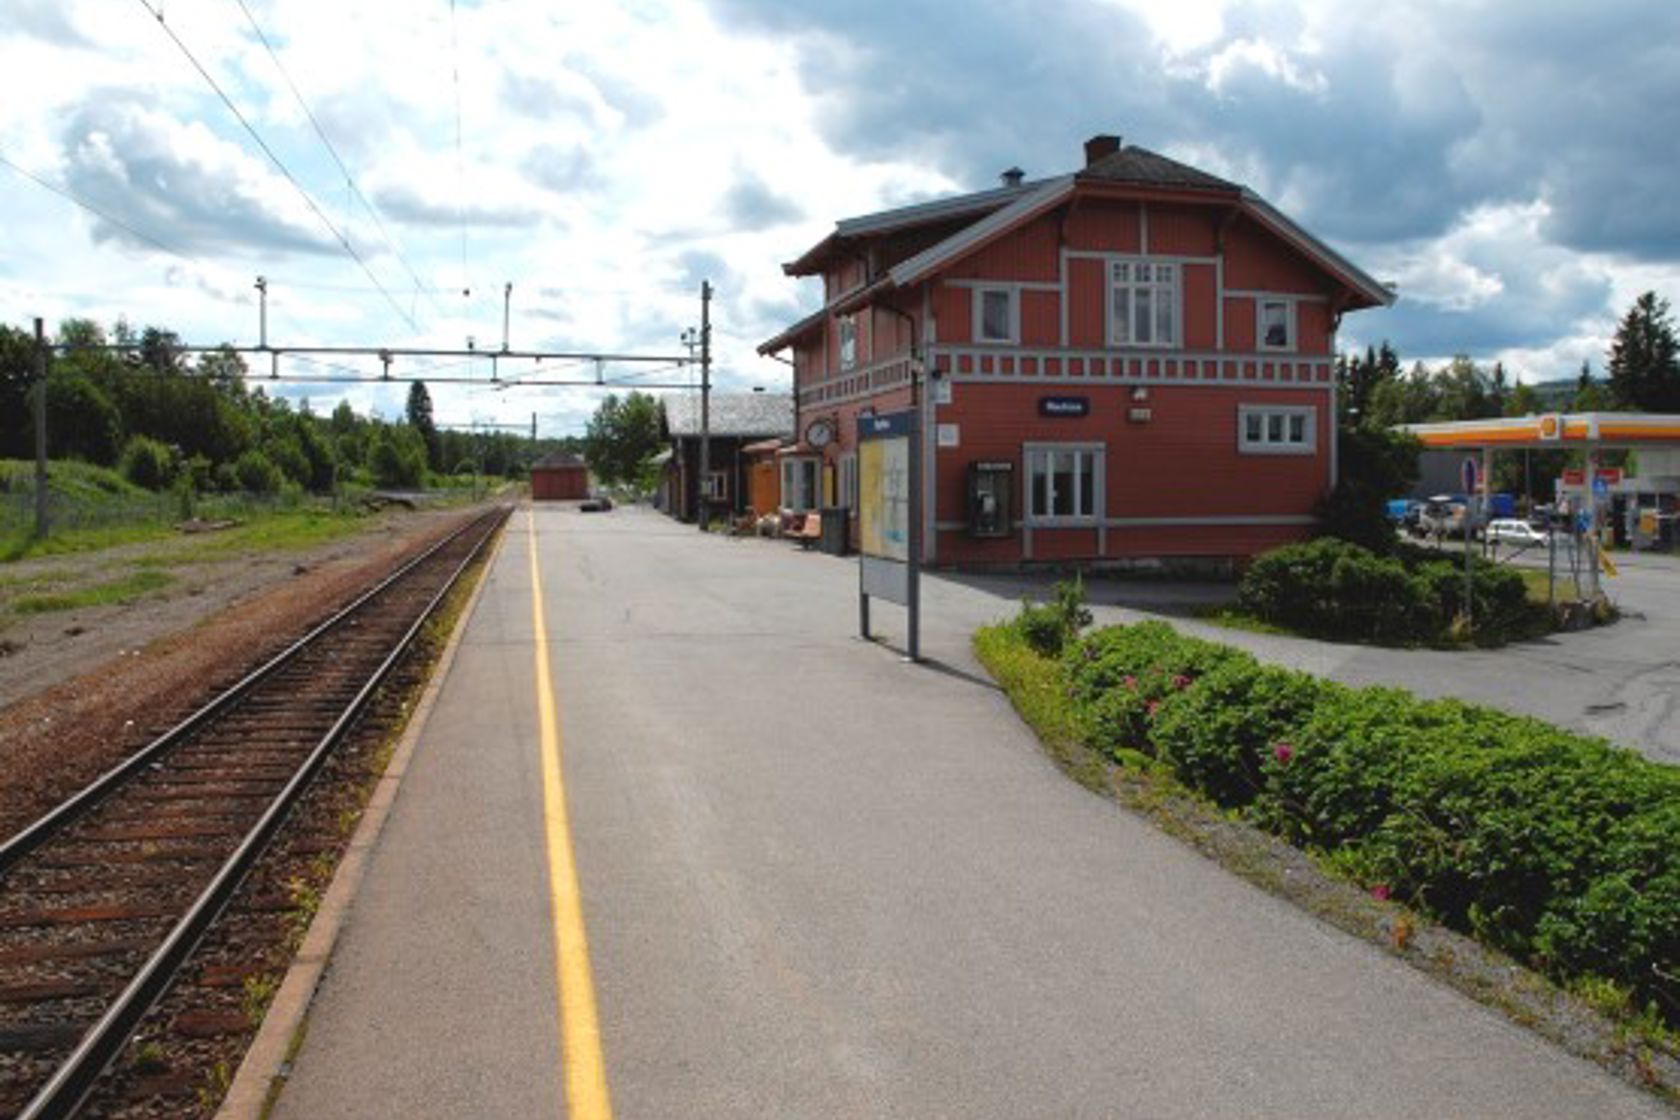 Exterior view of Raufoss station